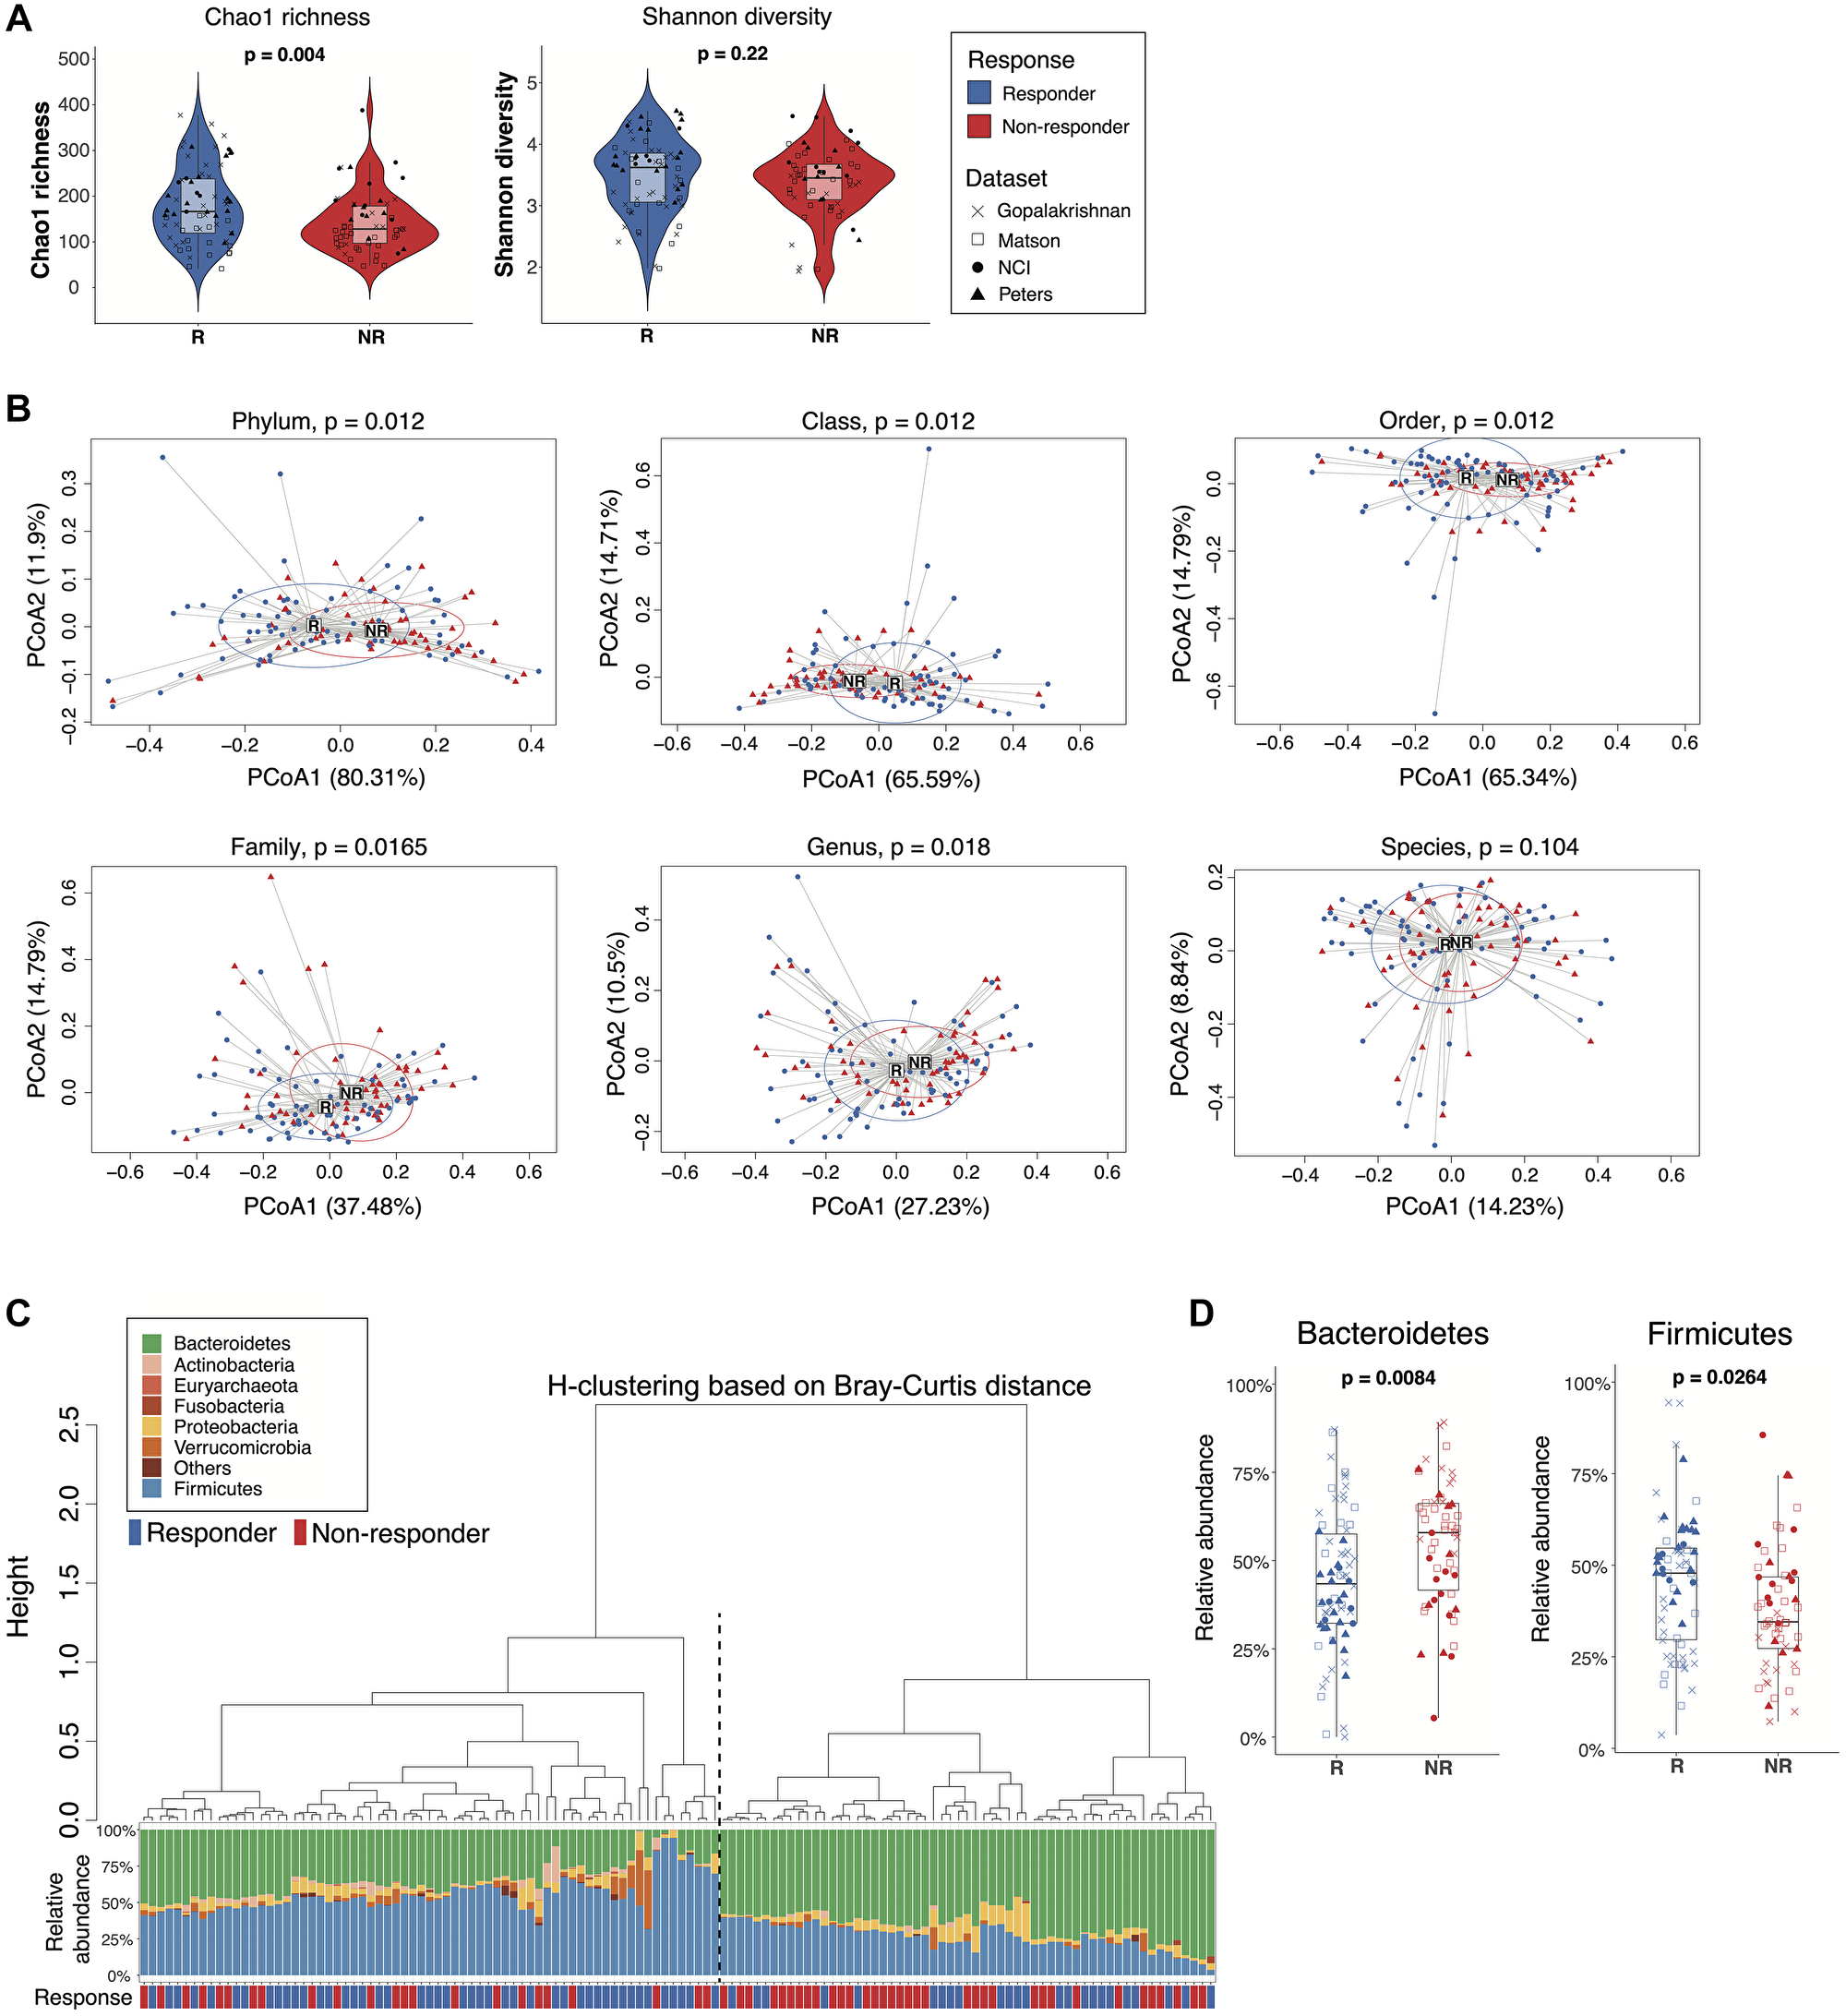 Comparisons of gut microbiome between responders and non-responders from the combined dataset.